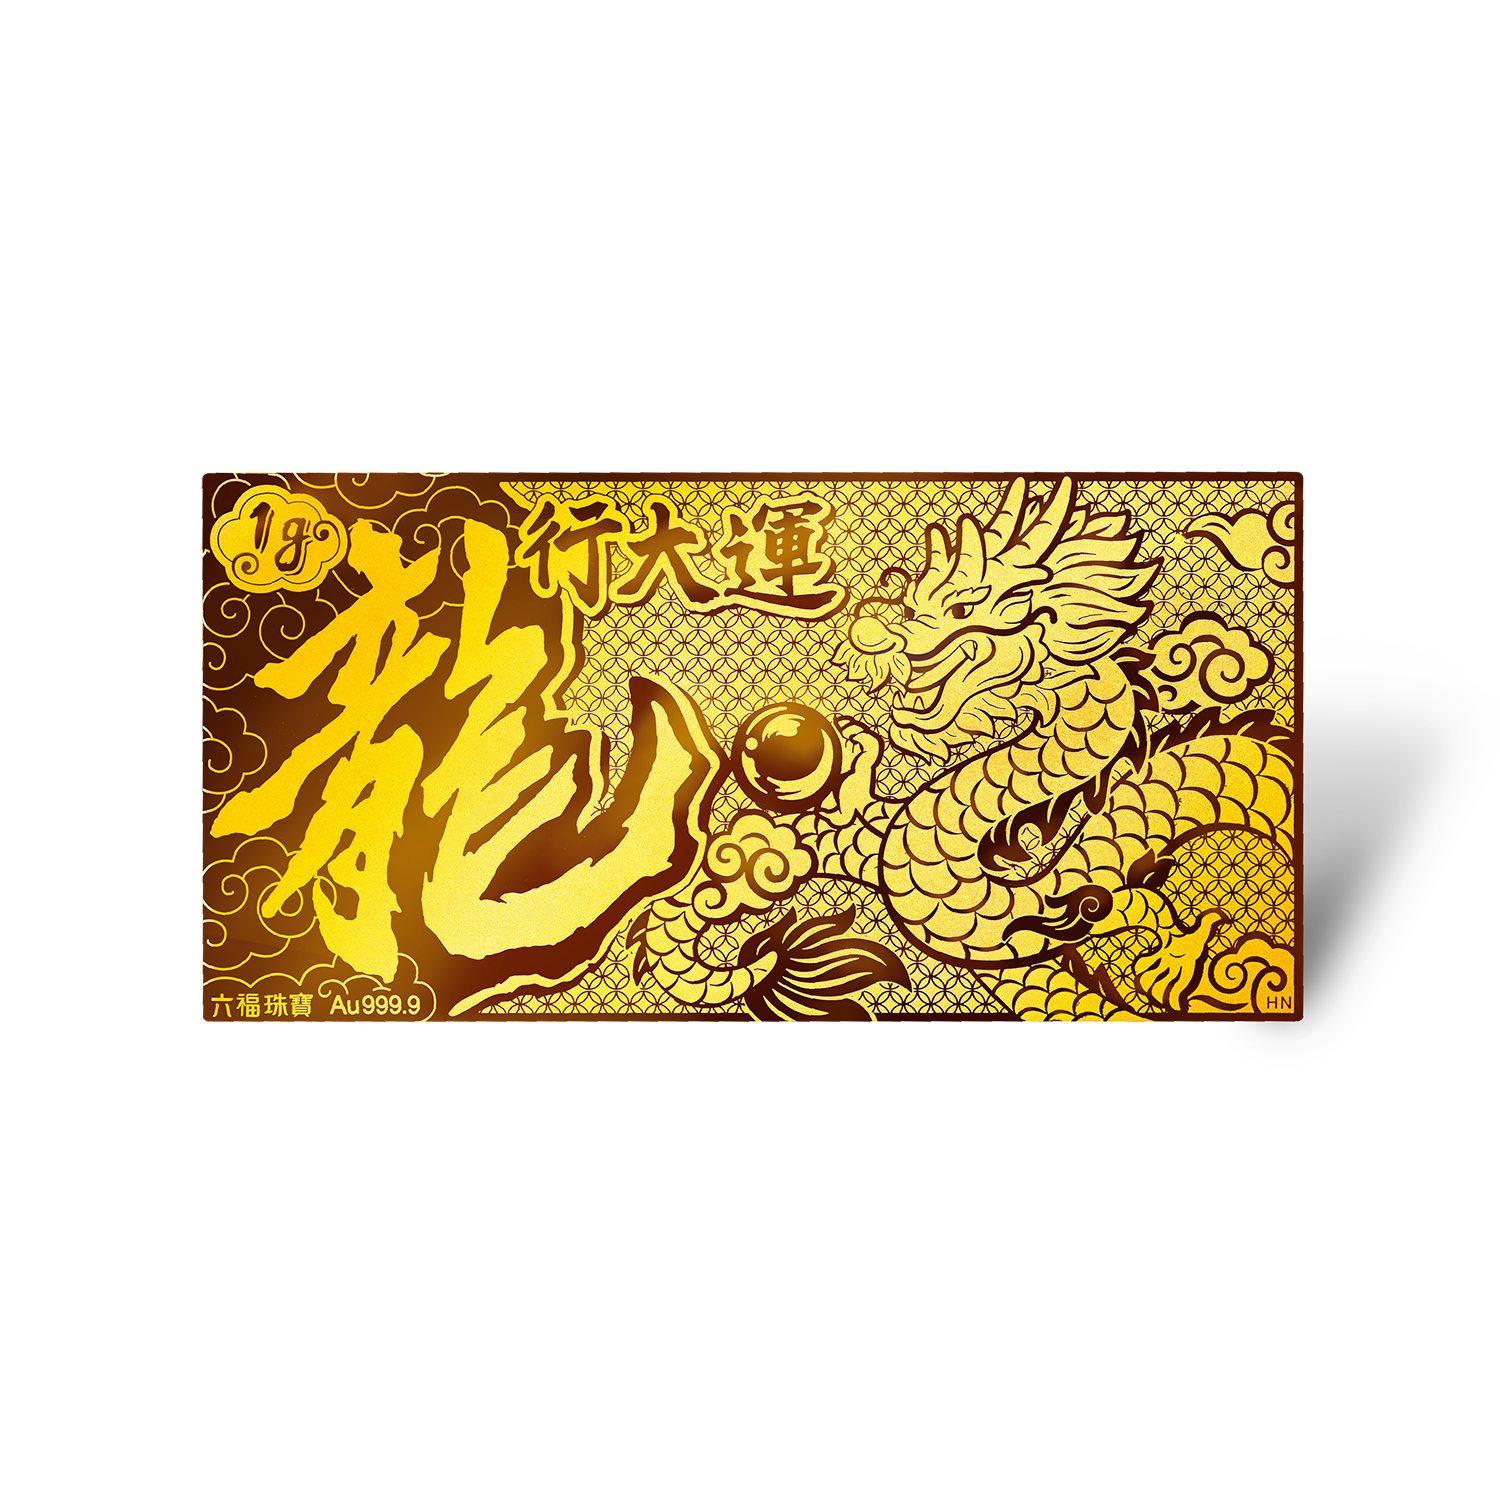 Fortune Dragon Collection "Fortune" Gold Bar